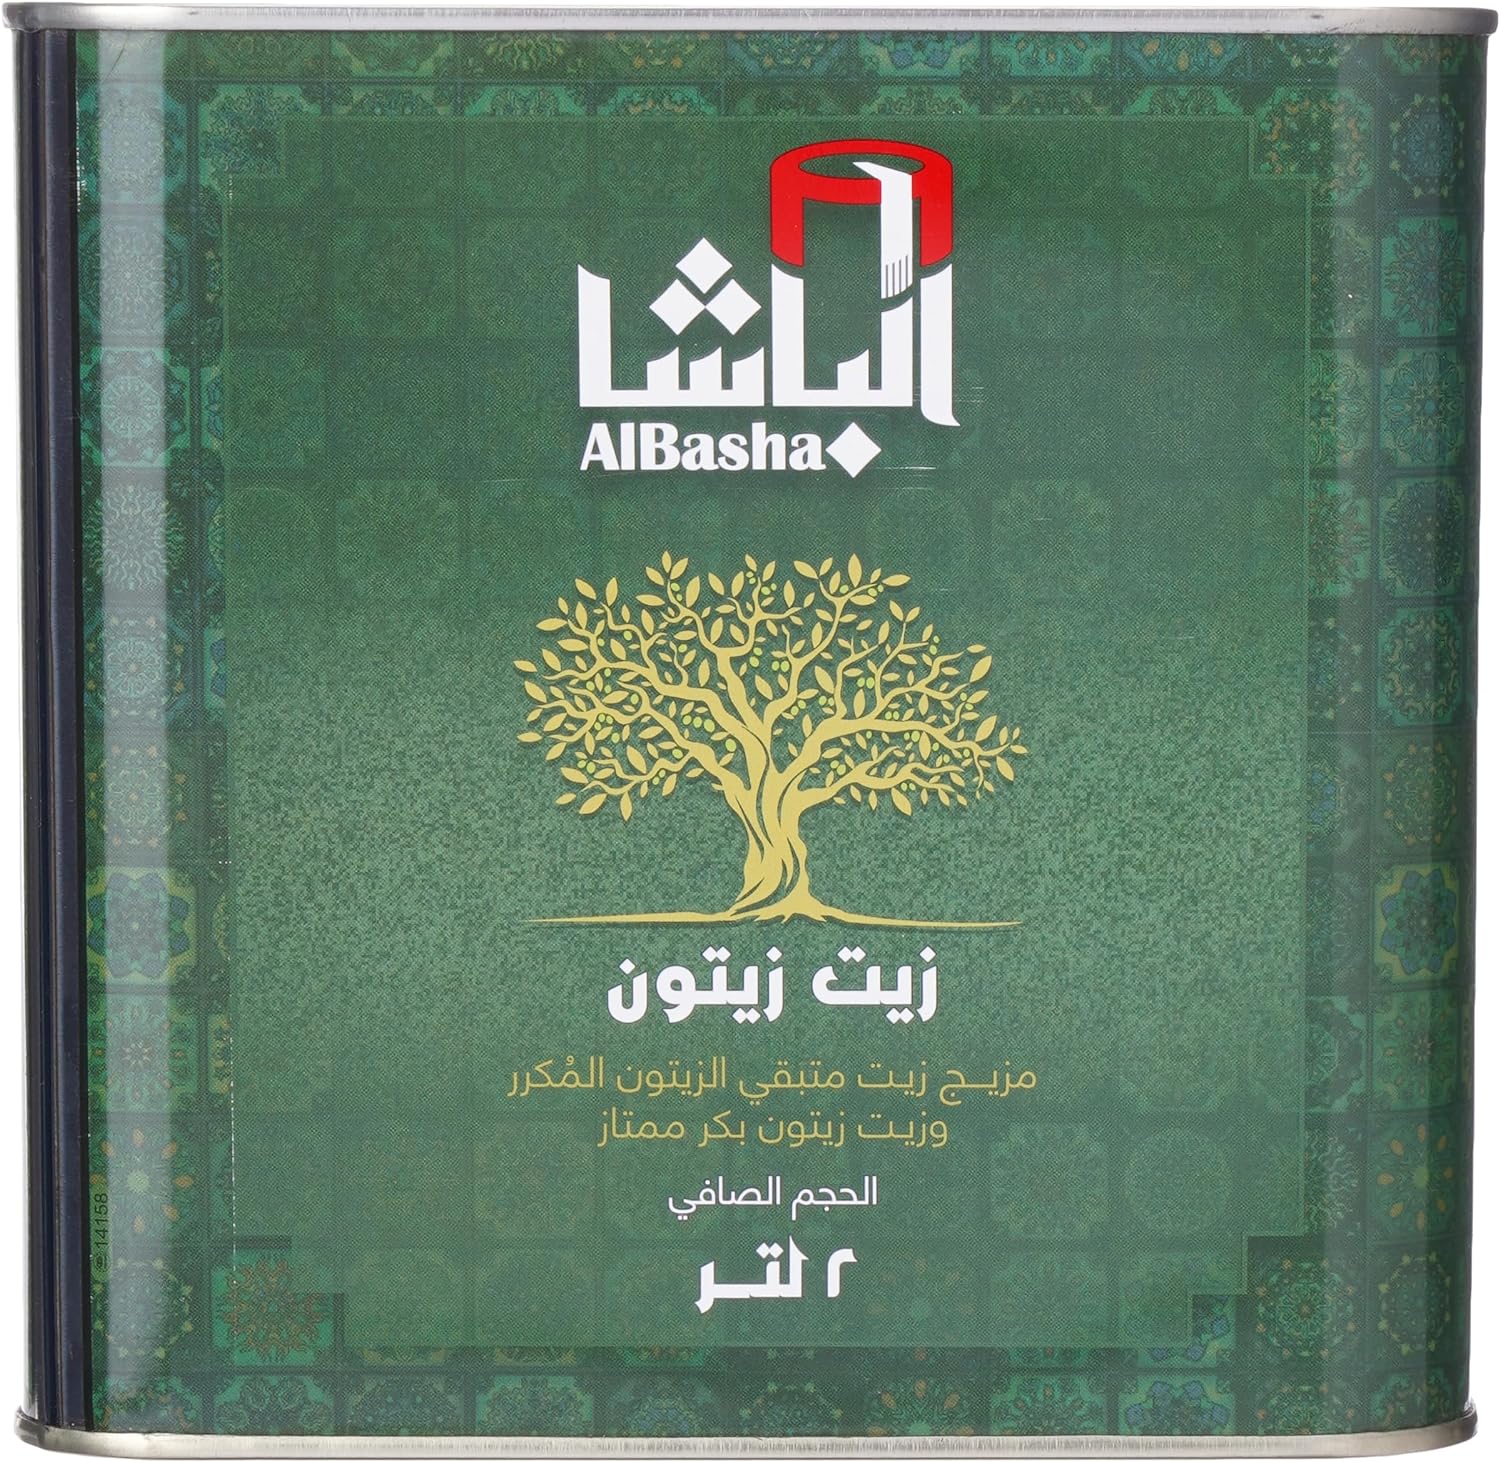 AL Basha Refined Pomace Blended with Extra Virgin Olive Oil, 2 Ltr, Yellow